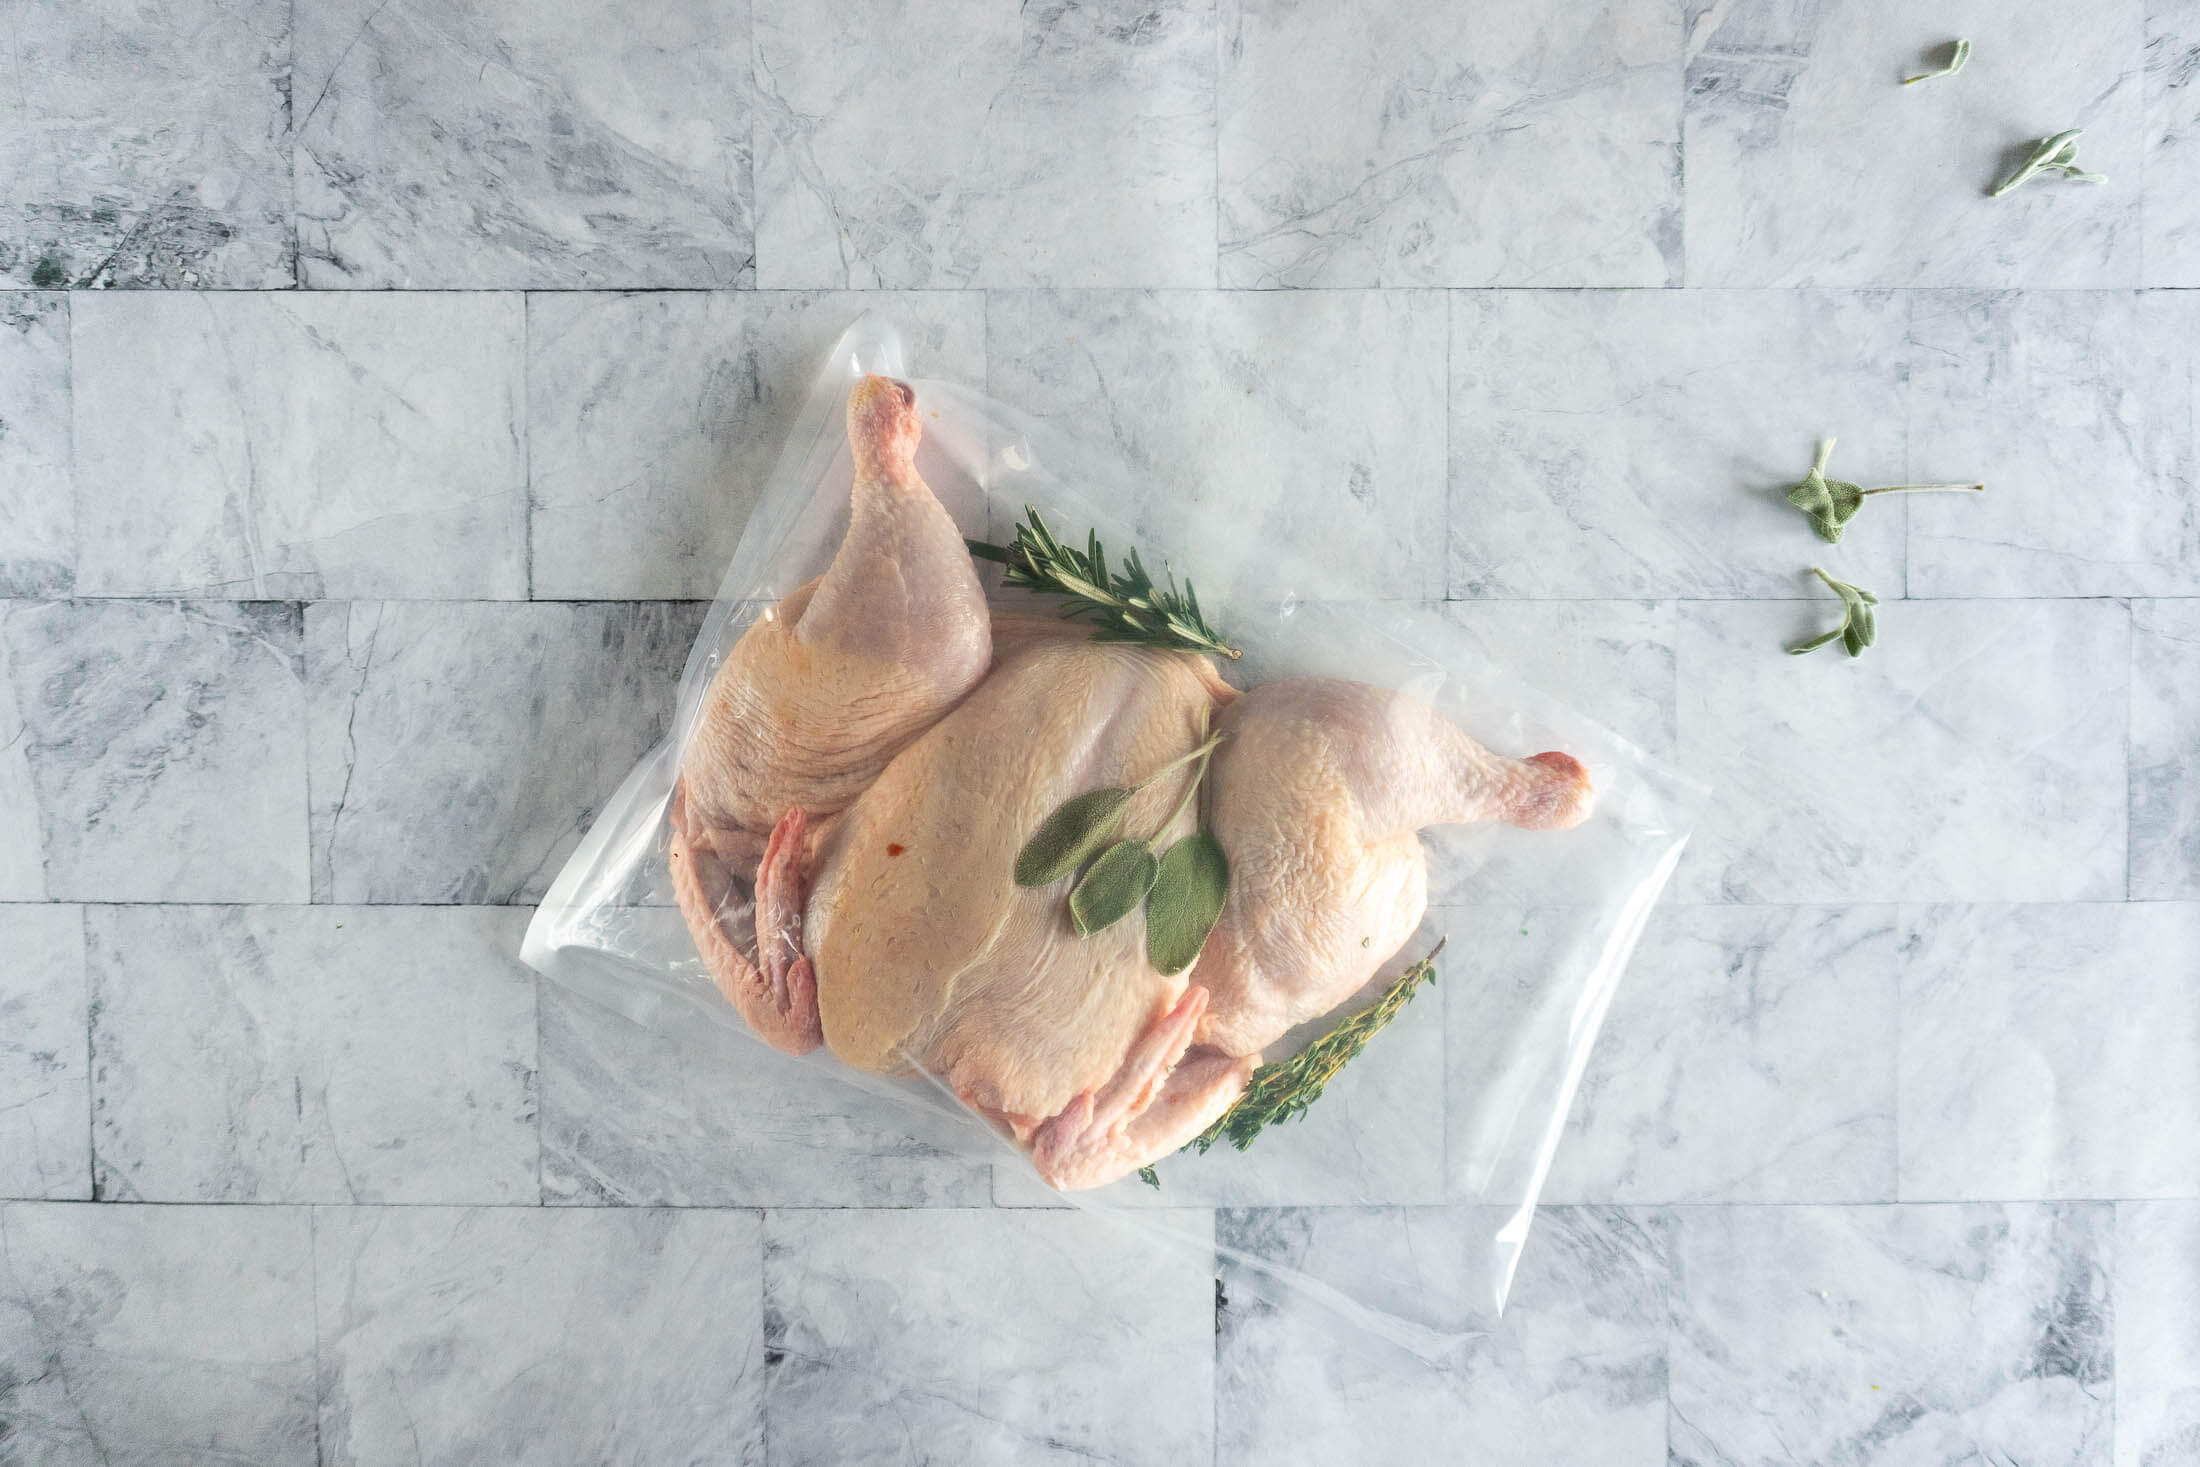 How To Sous Vide A Whole Chicken - Recipes.net